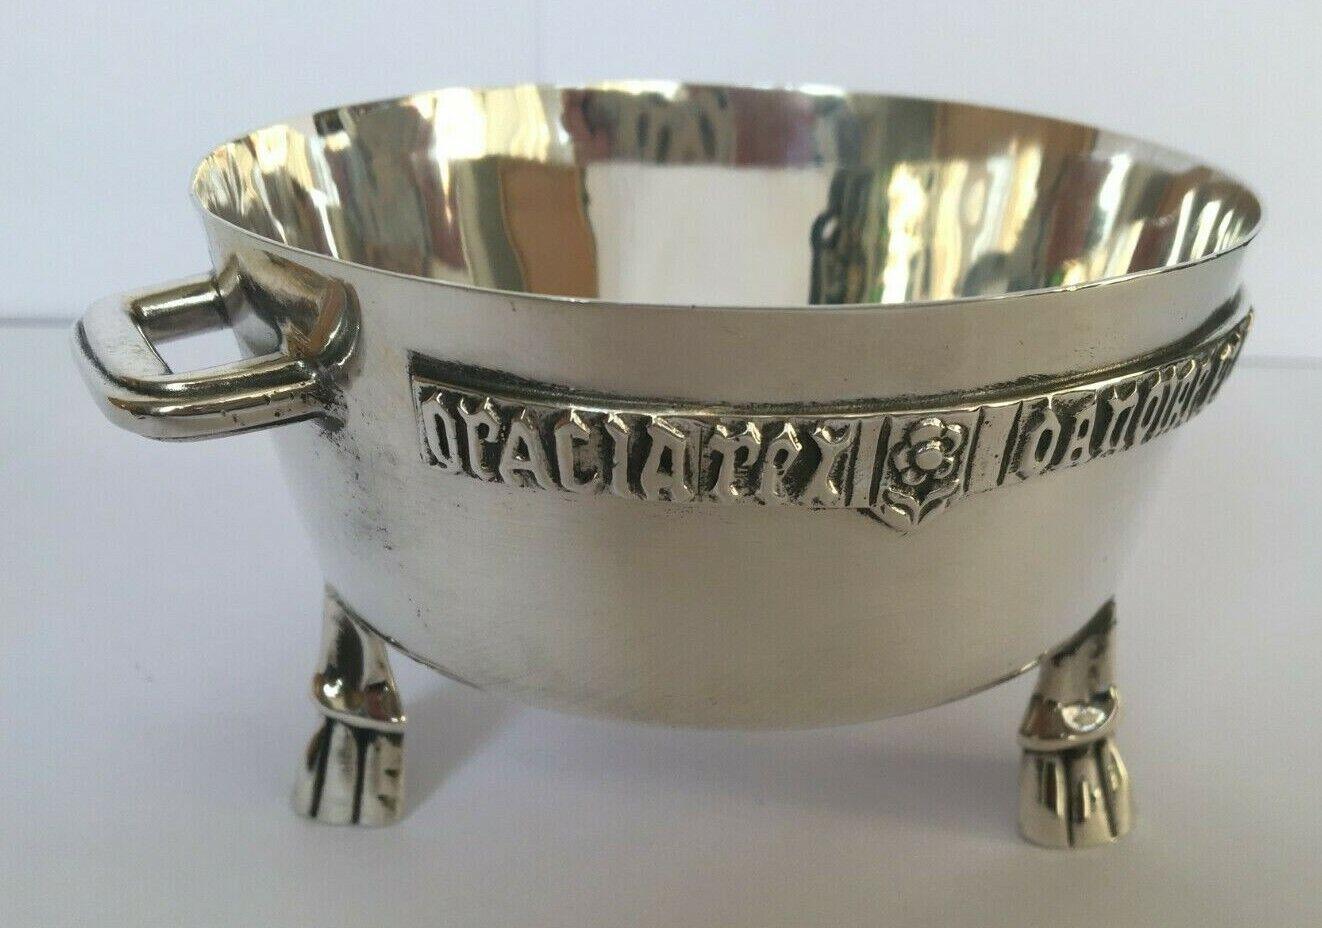 Arts and Crafts Sterling Silver Winchester Bushel Bowl

Additional Information:
Hallmarked: Made by P Ltd in Birmingham in 1968.
Silver weight: 198g
Size: 10.3cm diameter. 12.6cm wide, including the handles. 6.2cm tall.
SMS3346